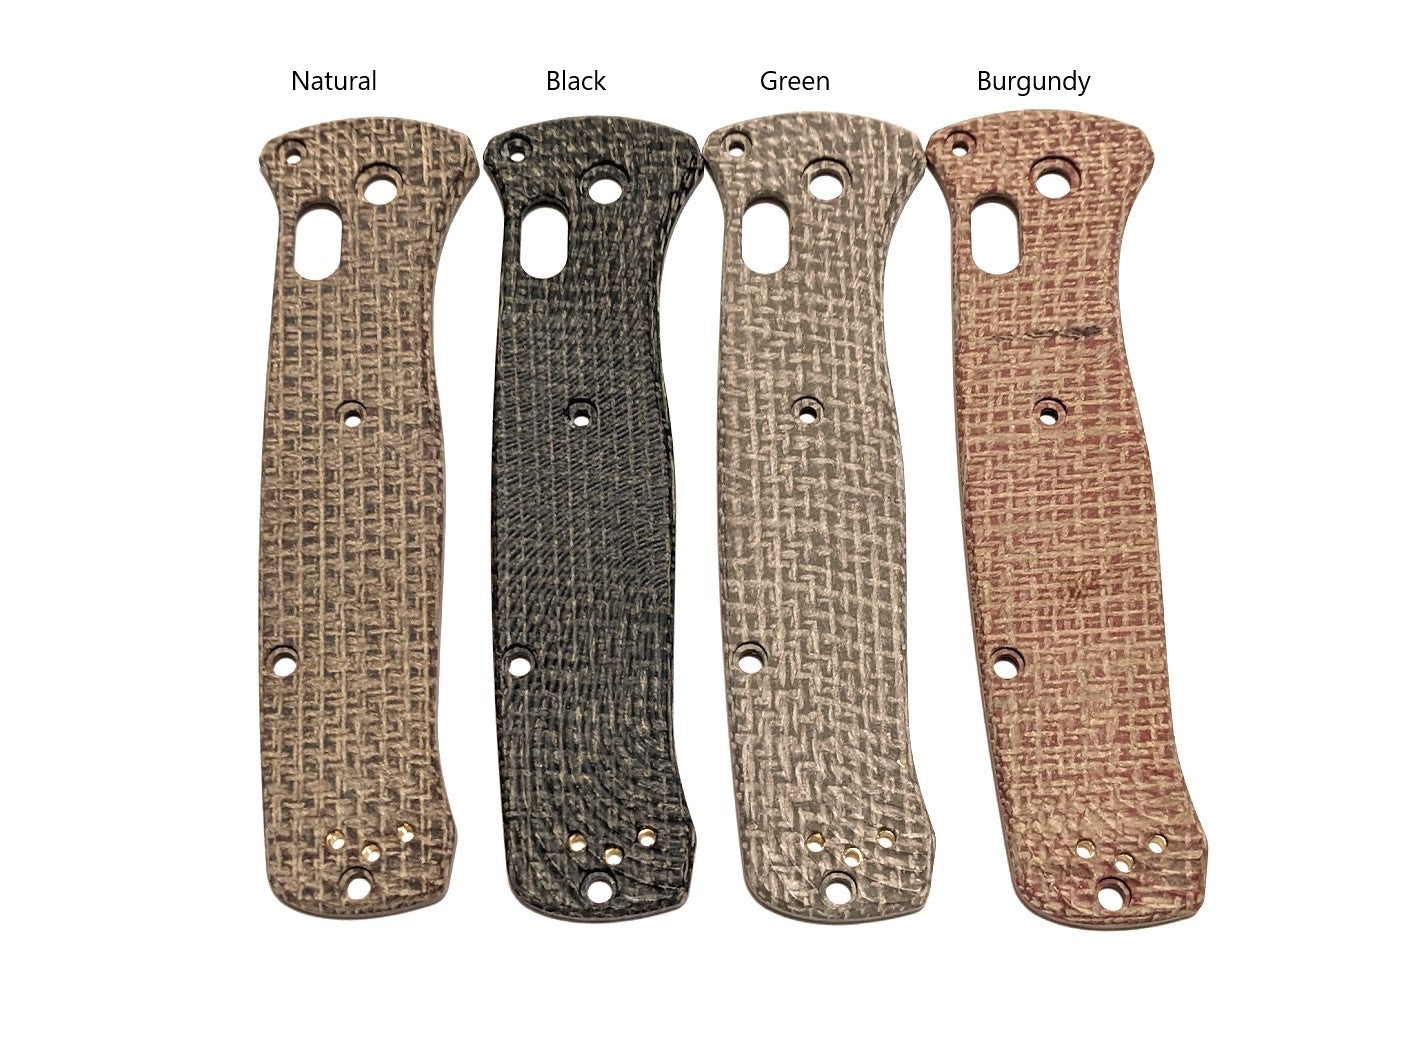 Burlap Micarta scales for the Benchmade Bailout Knife